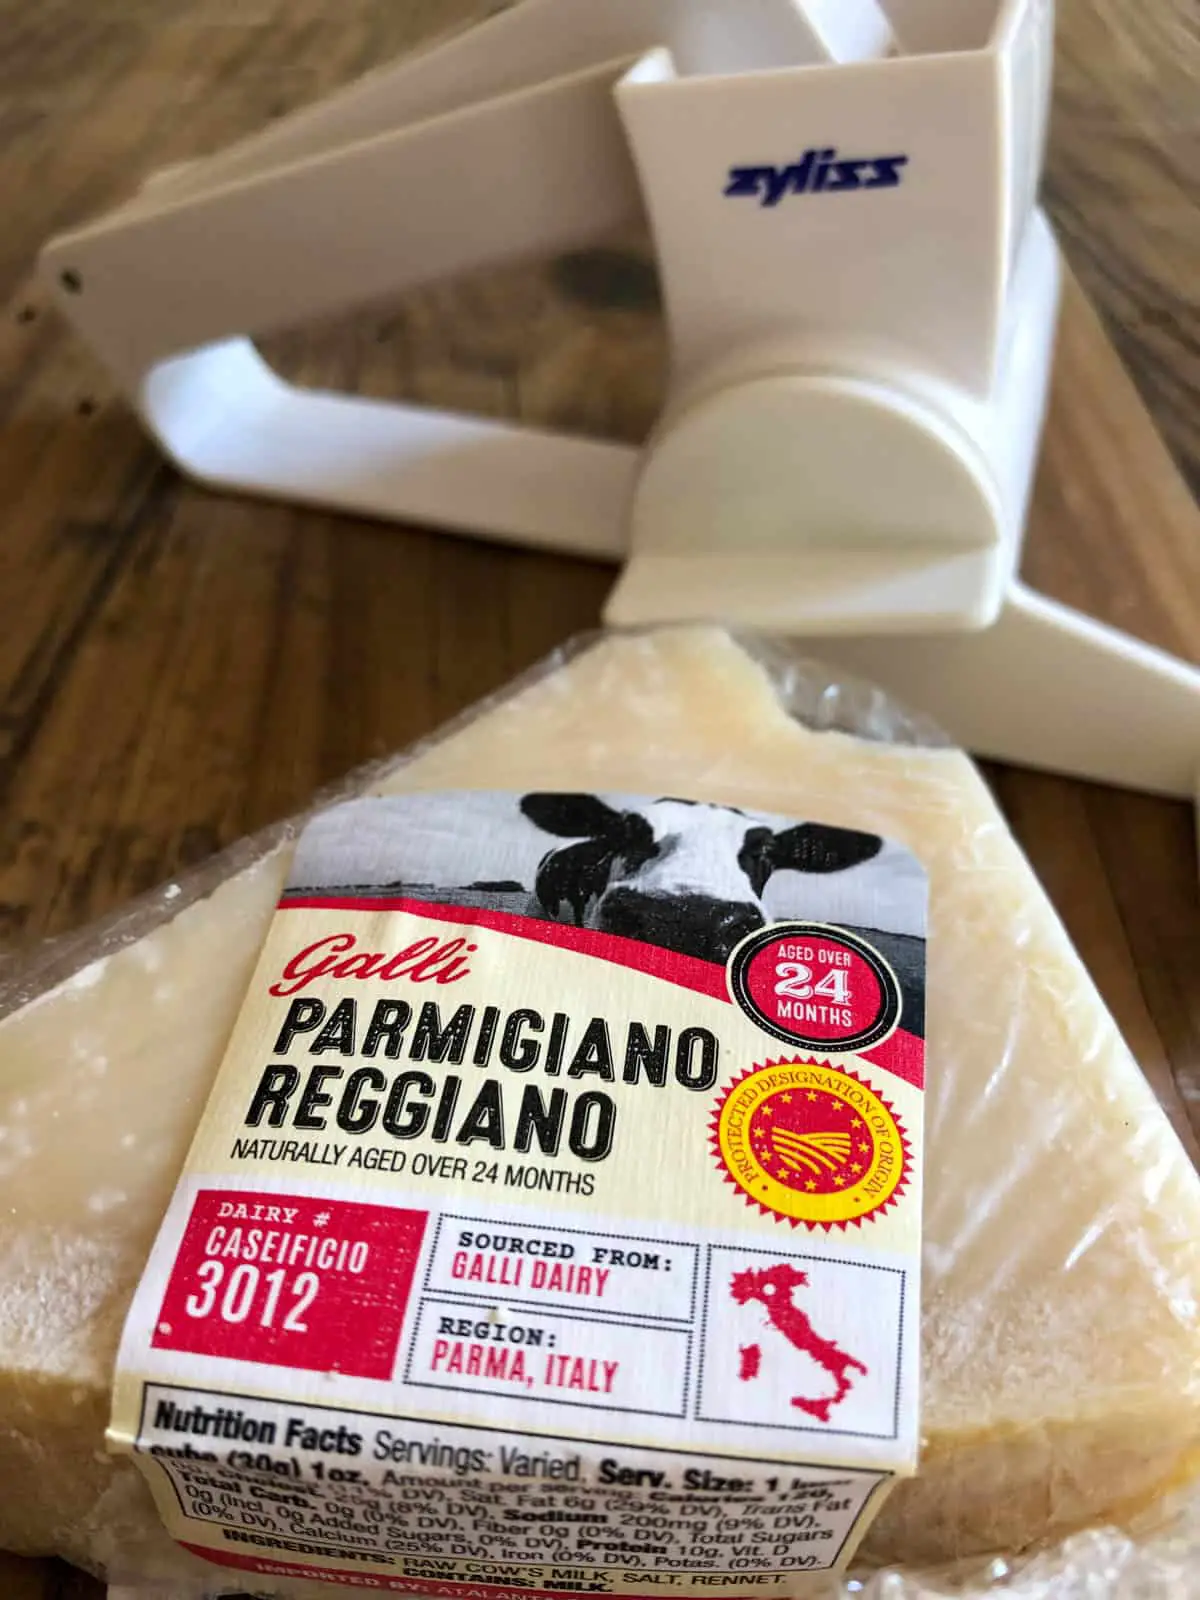 Zyliss cheese grater and block of Parmigiano reggiano